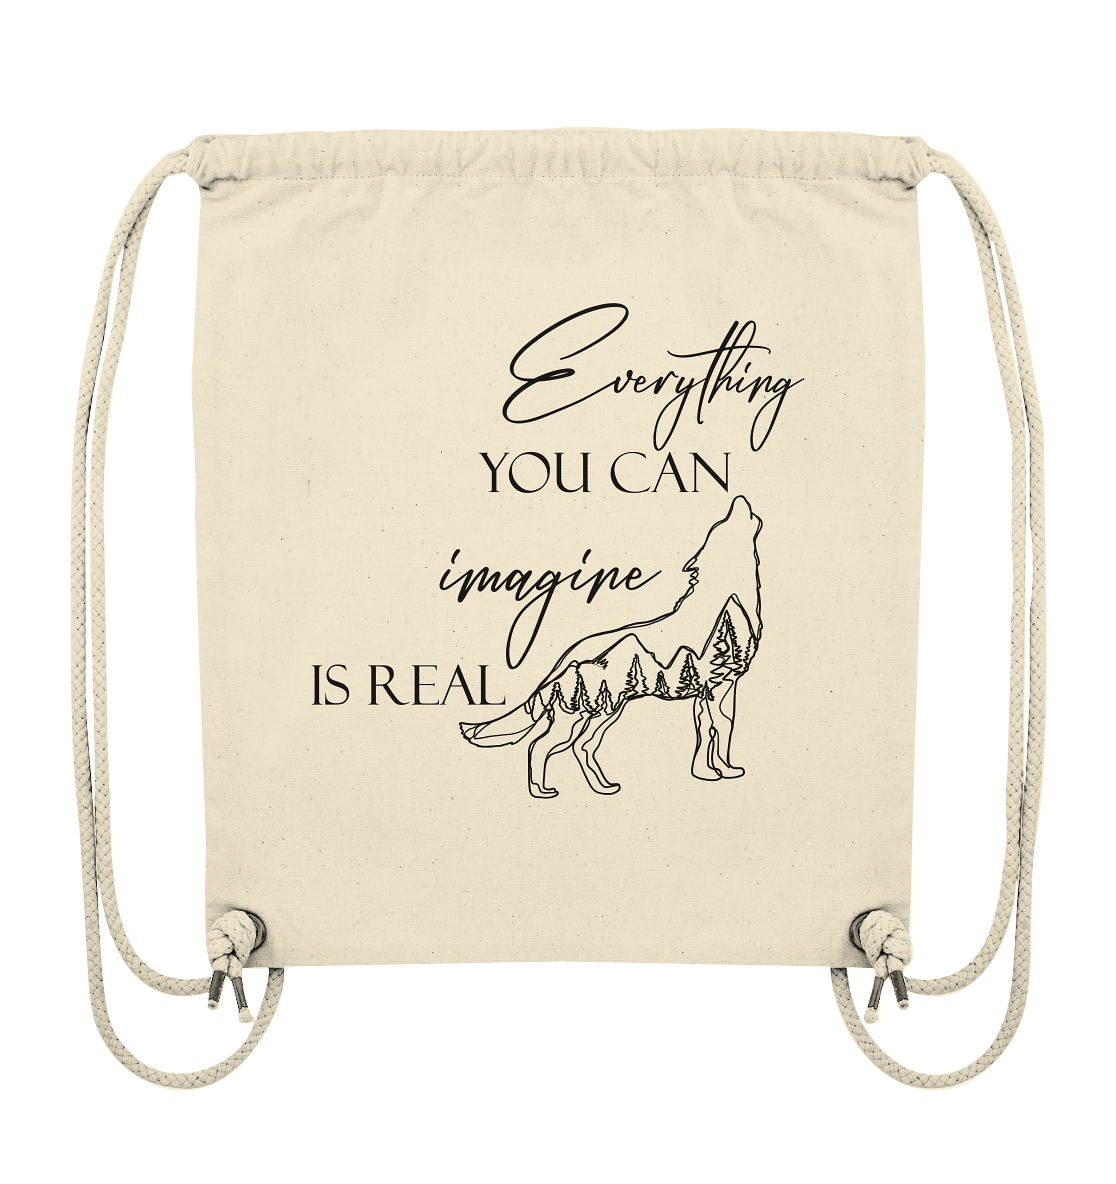 Wolf "Everything you can imagine is real" - Organic Gym Bag